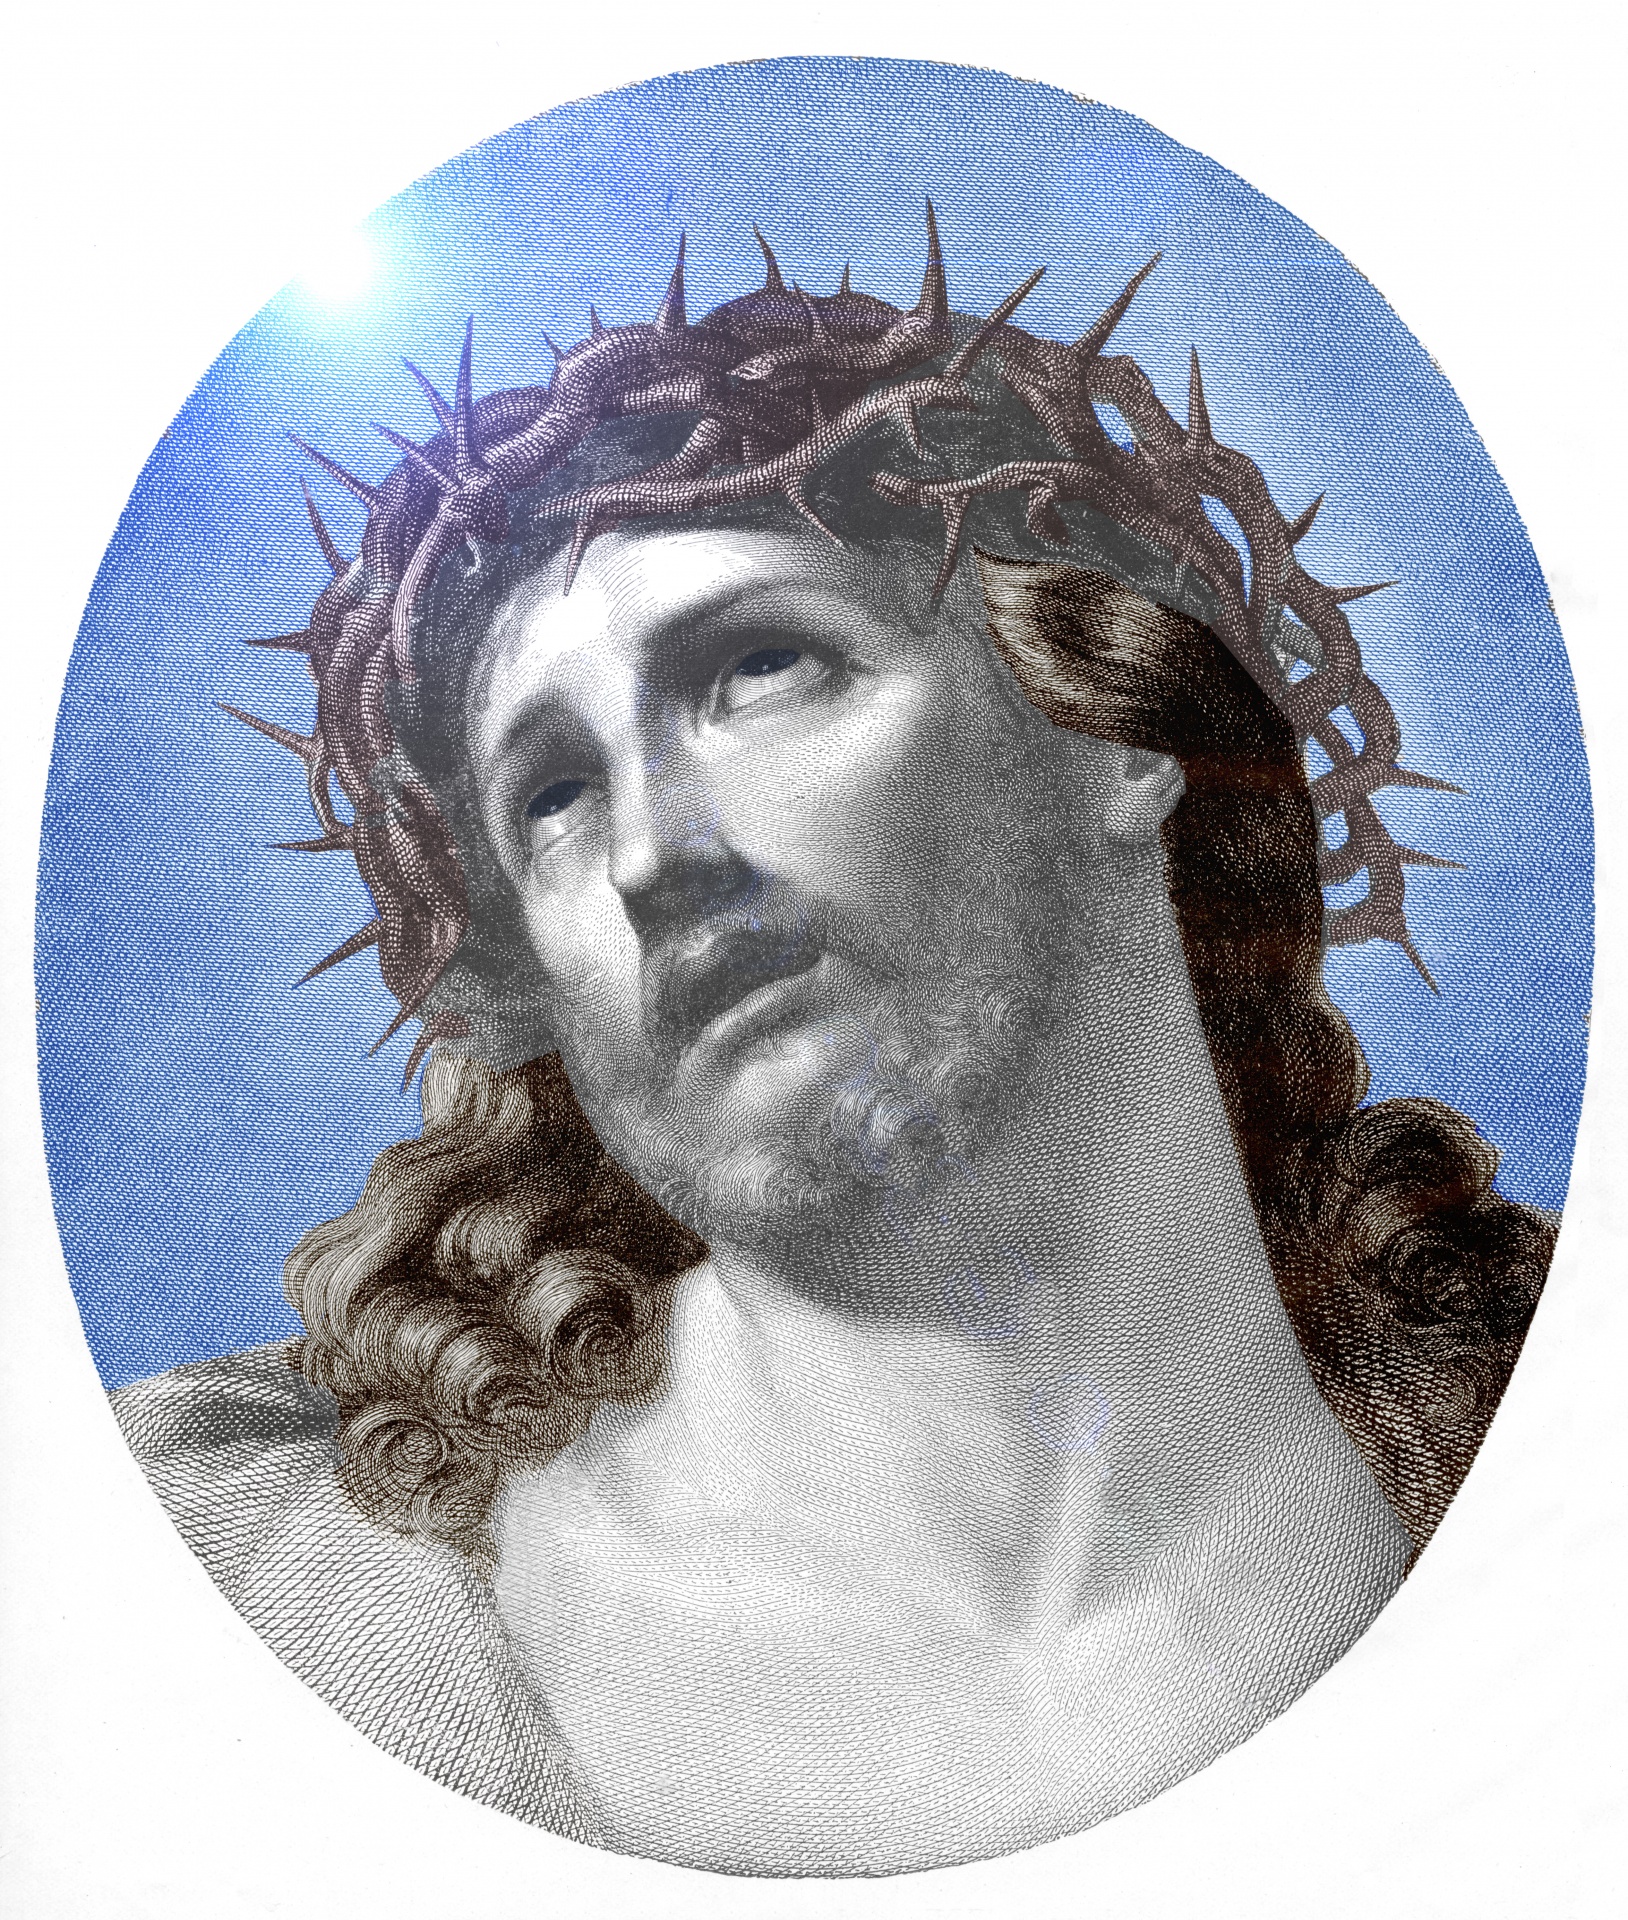 Crown of Thorns, The Crucifixion